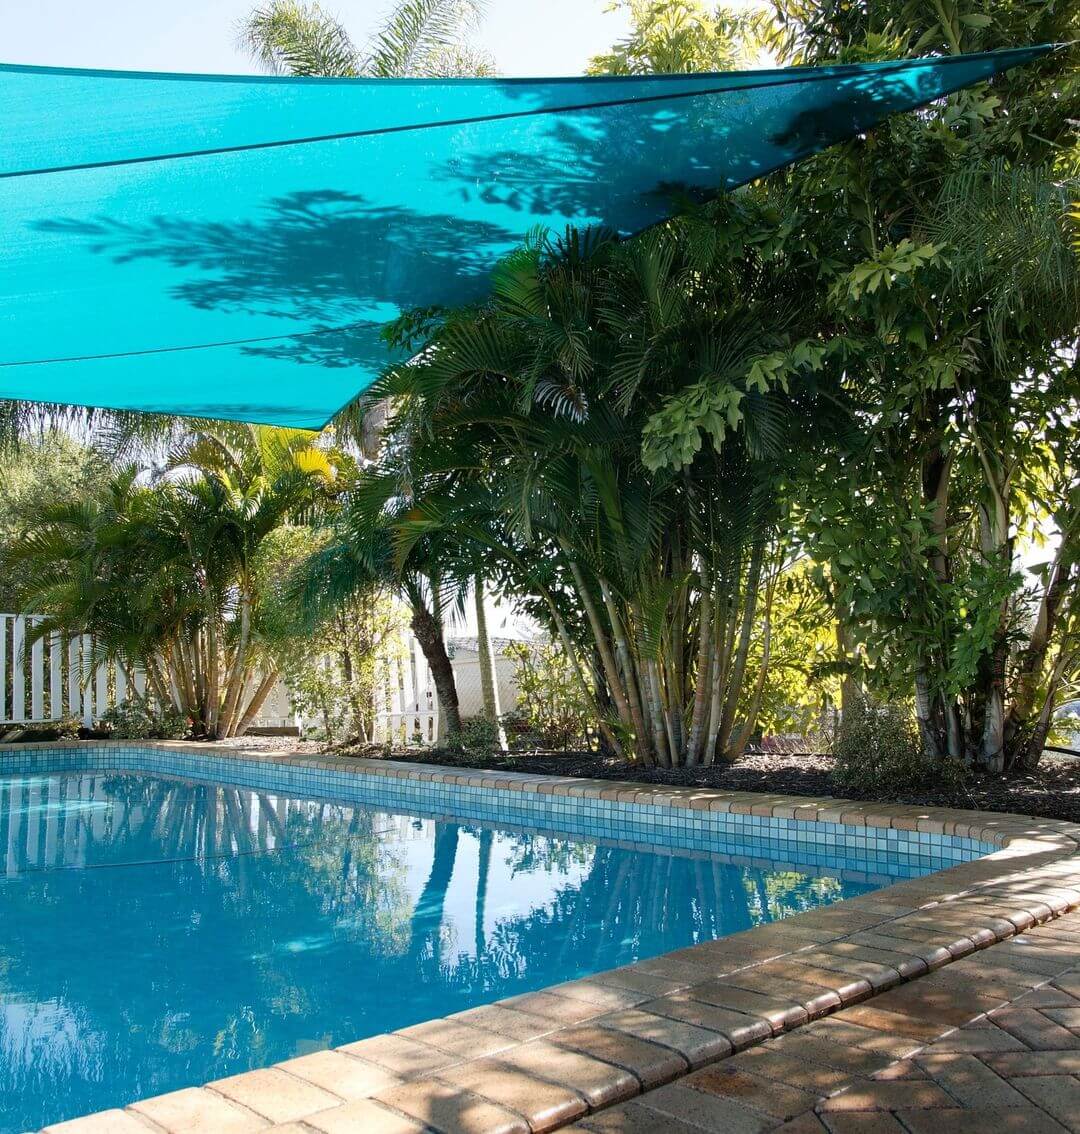 Shade Sail over swimming pool to keep the water cooler.